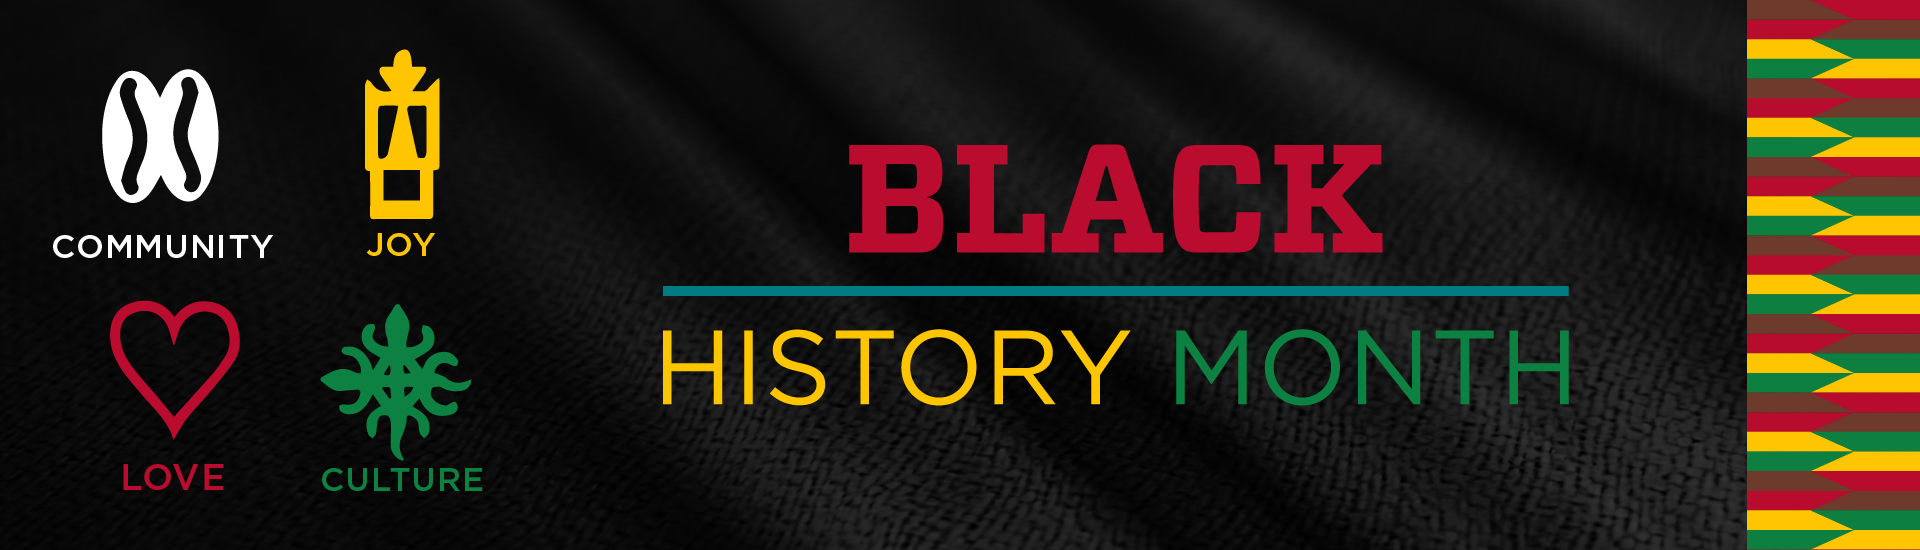 Proud To Be': Black History Month - Housing Diversity Network